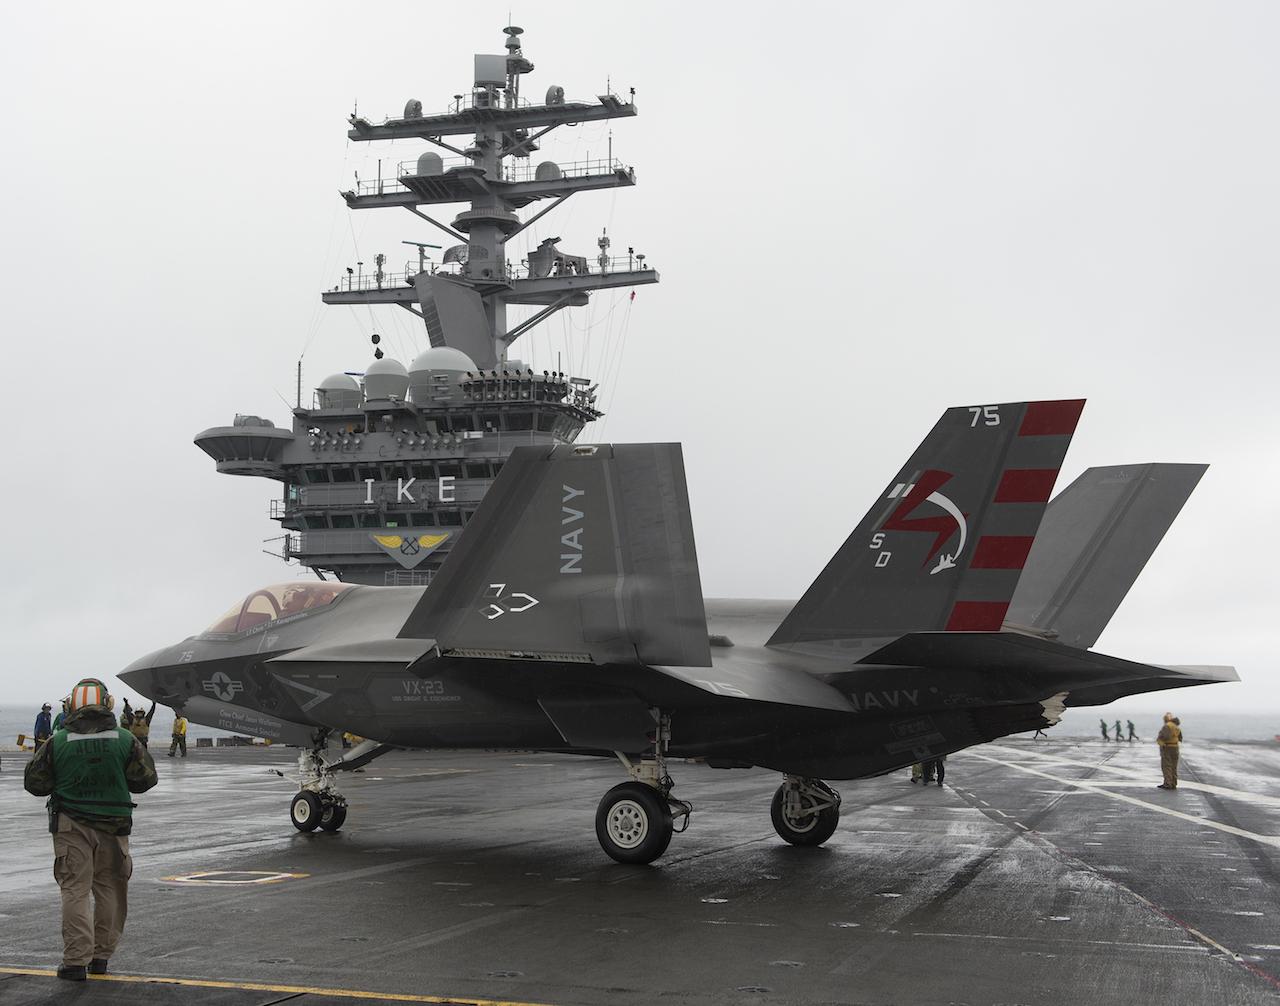 151002-O-ZZ999-002 ATLANTIC OCEAN (Oct. 2, 2015) An F-35C Lightning II carrier variant Joint Strike Fighter from the Pax River Integrated Test Force conducts its first arrested landing aboard the aircraft carrier USS Dwight D. Eisenhower (CVN 69). Two F-35Cs from the Salty Dogs of Air Test and Evaluation Squadron (VX) 23 are conducting follow-on developmental test (DT-II) sea trials aboard the Eisenhower. Cmdr. Tony “Brick” Wilson flew aircraft 73/CF-03 and Lt. Chris “TJ” Karapostoles flew aircraft 75/CF-05. (U.S. Navy photo courtesy Lockheed Martin photo by Andy Wolfe/Released)